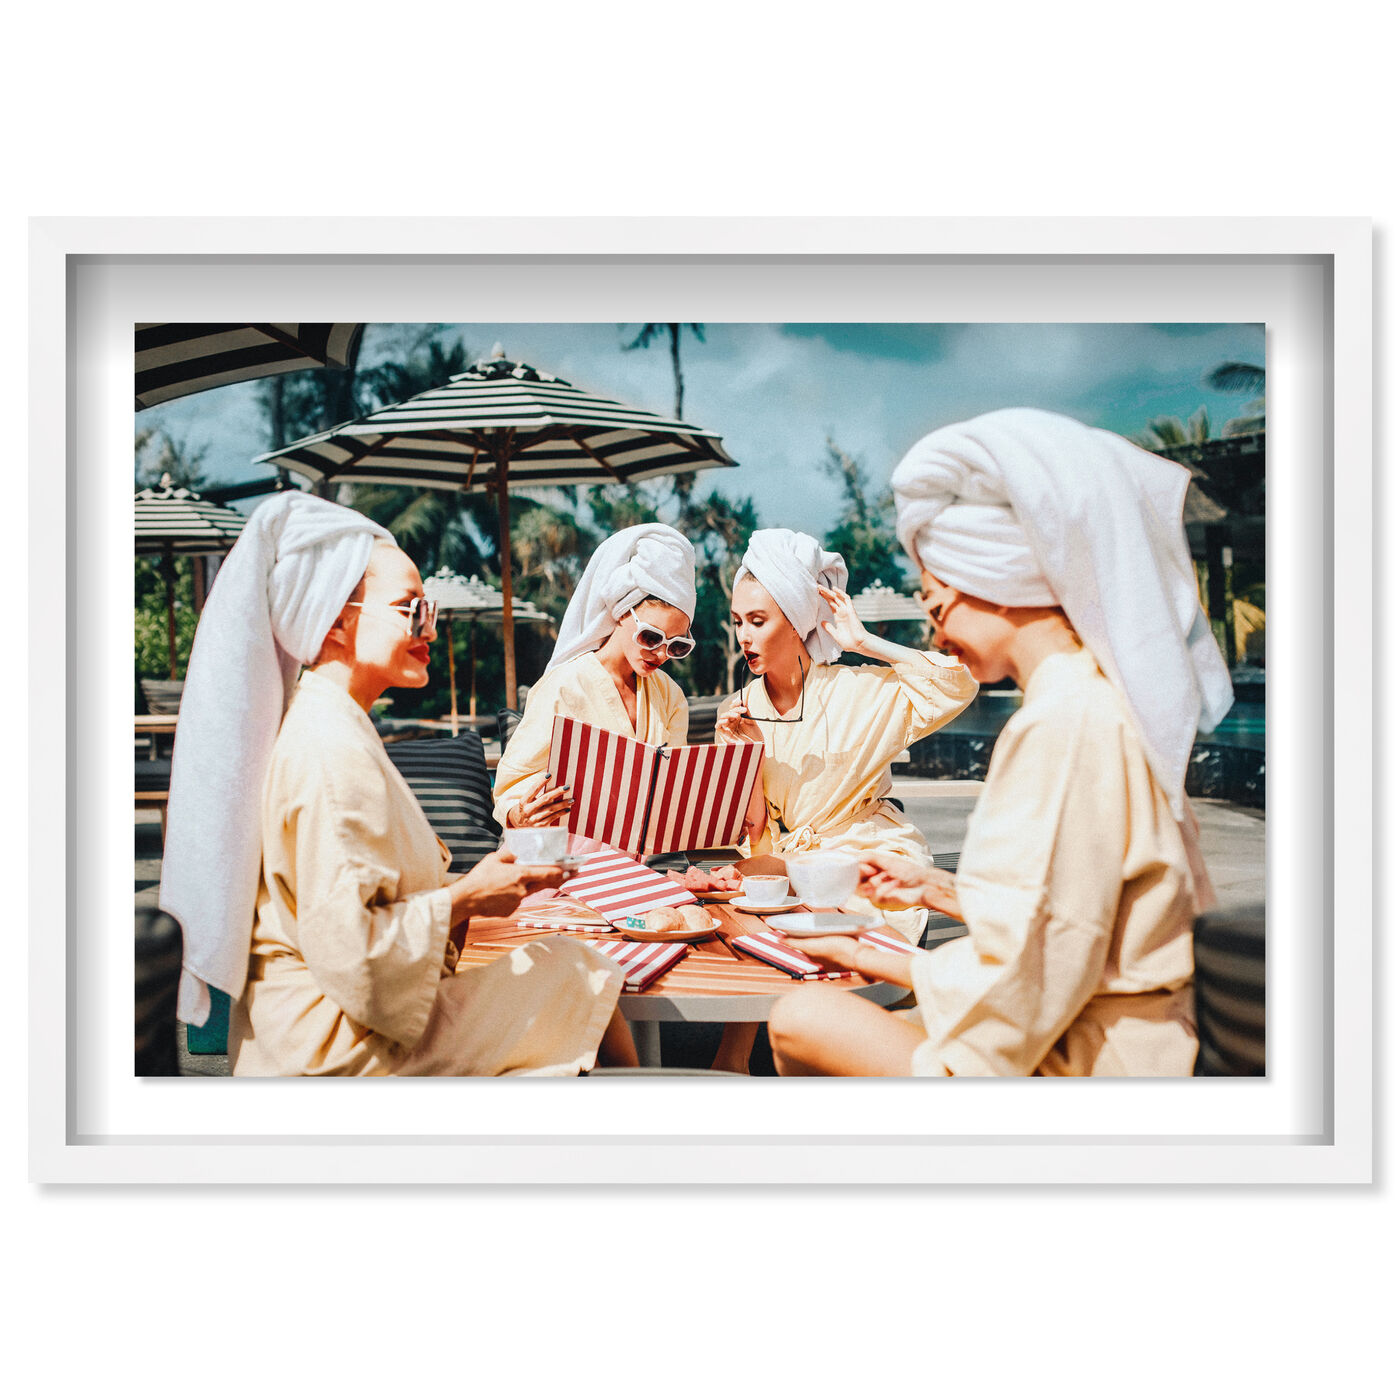 Ladies who Brunch and Launch - Displayed in a shadowbox